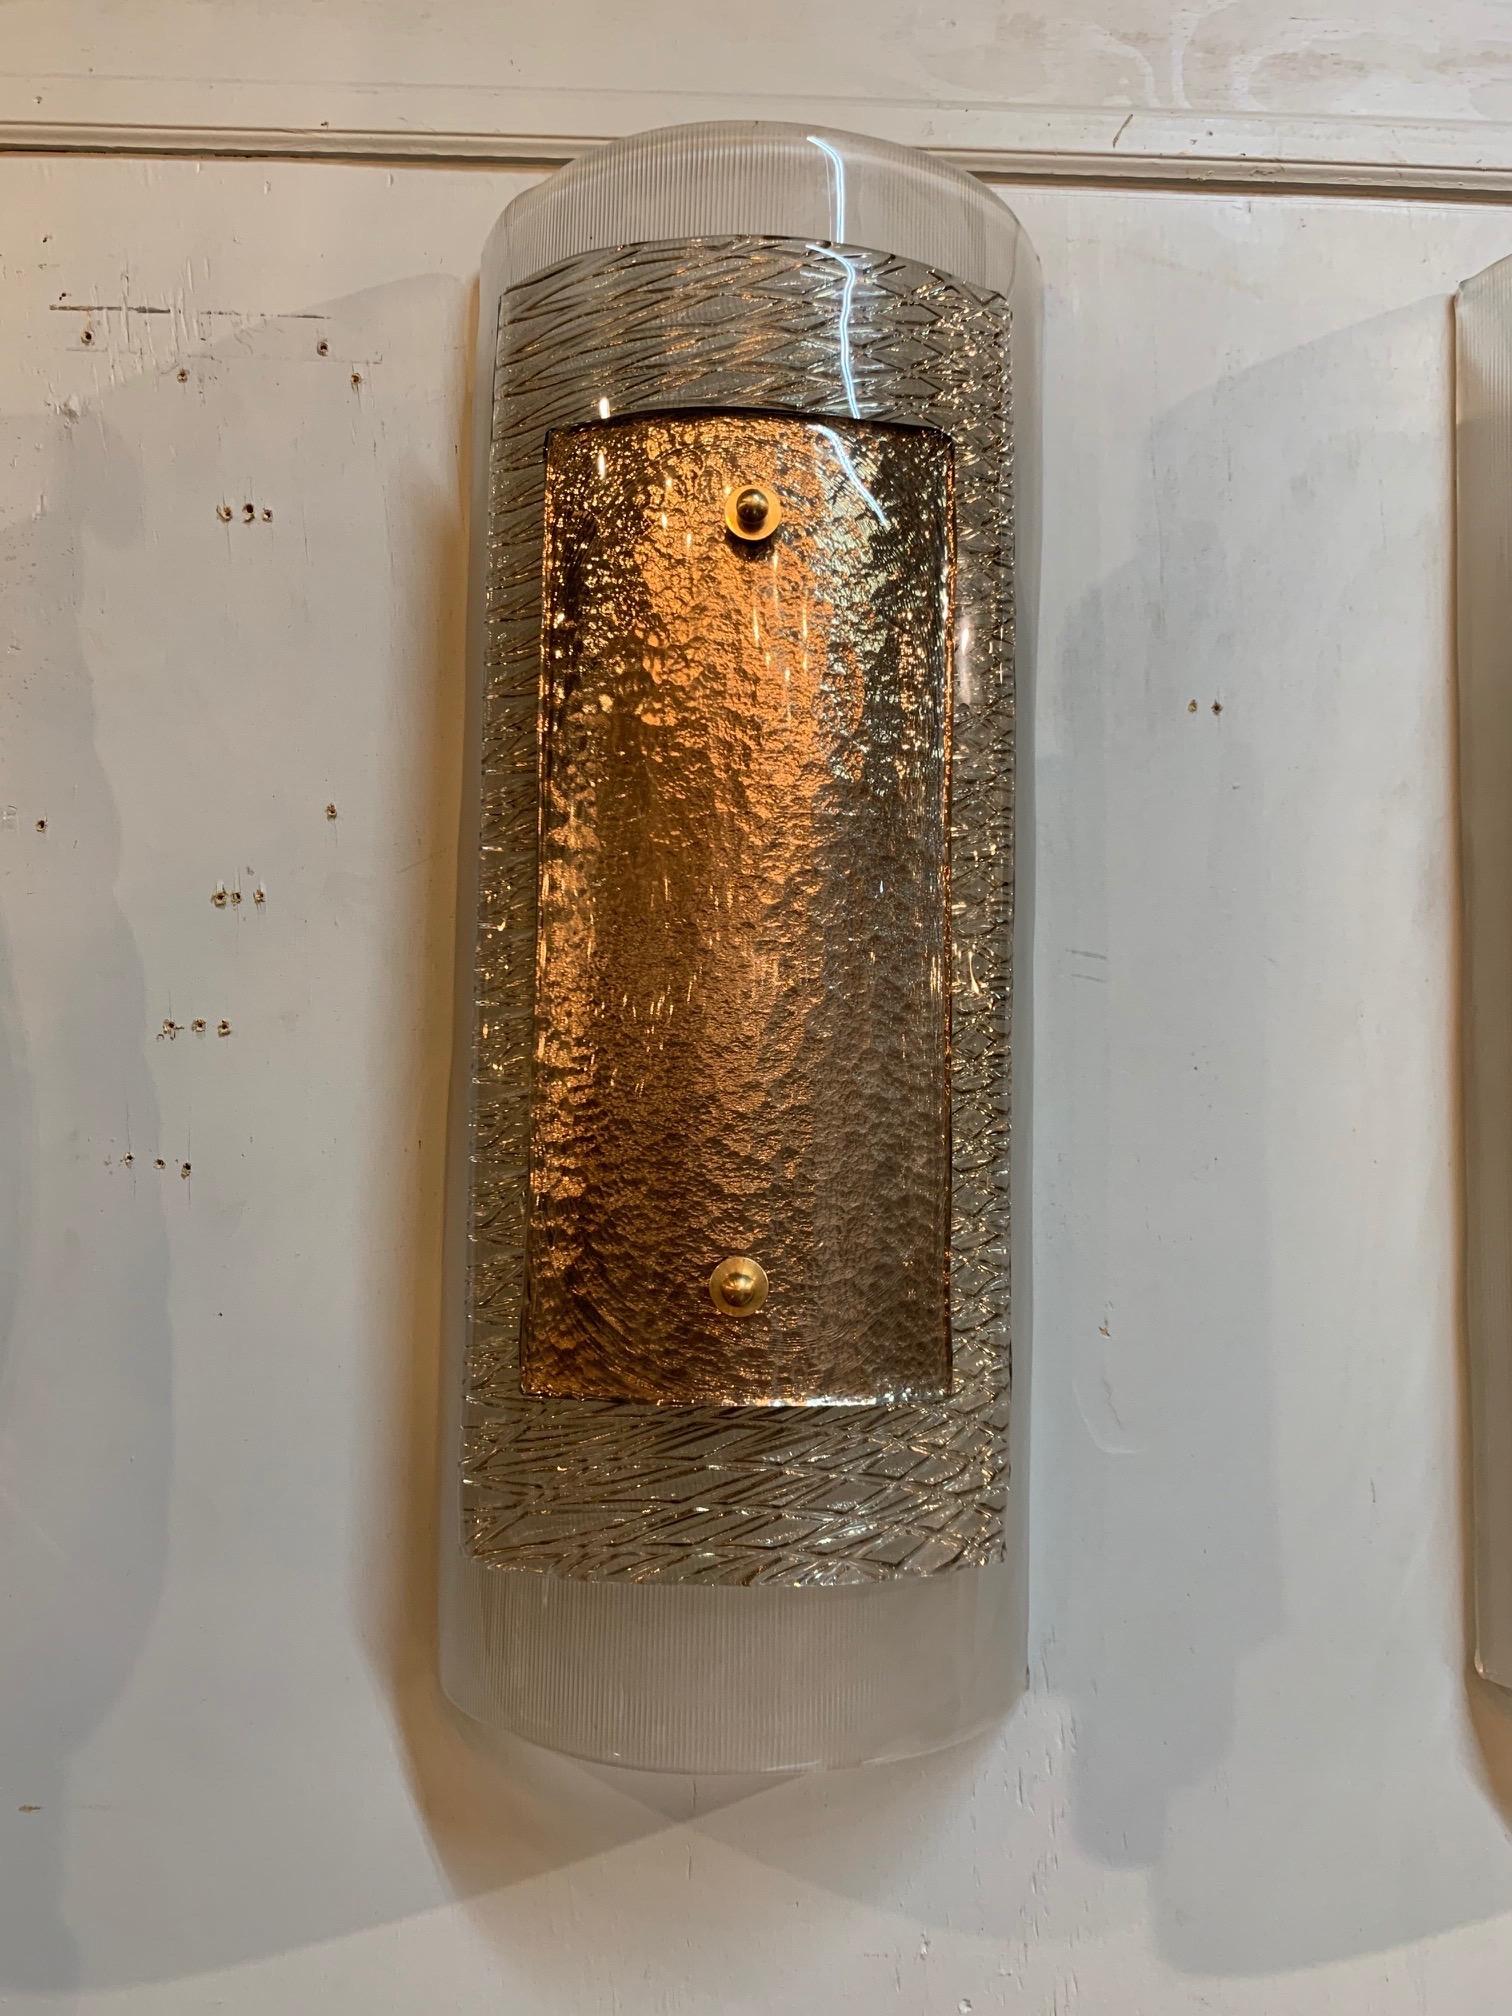 Gorgeous pair of modern Murano glass wall sconces. These have 3 layers of glass each with a different color and texture. Very special!!